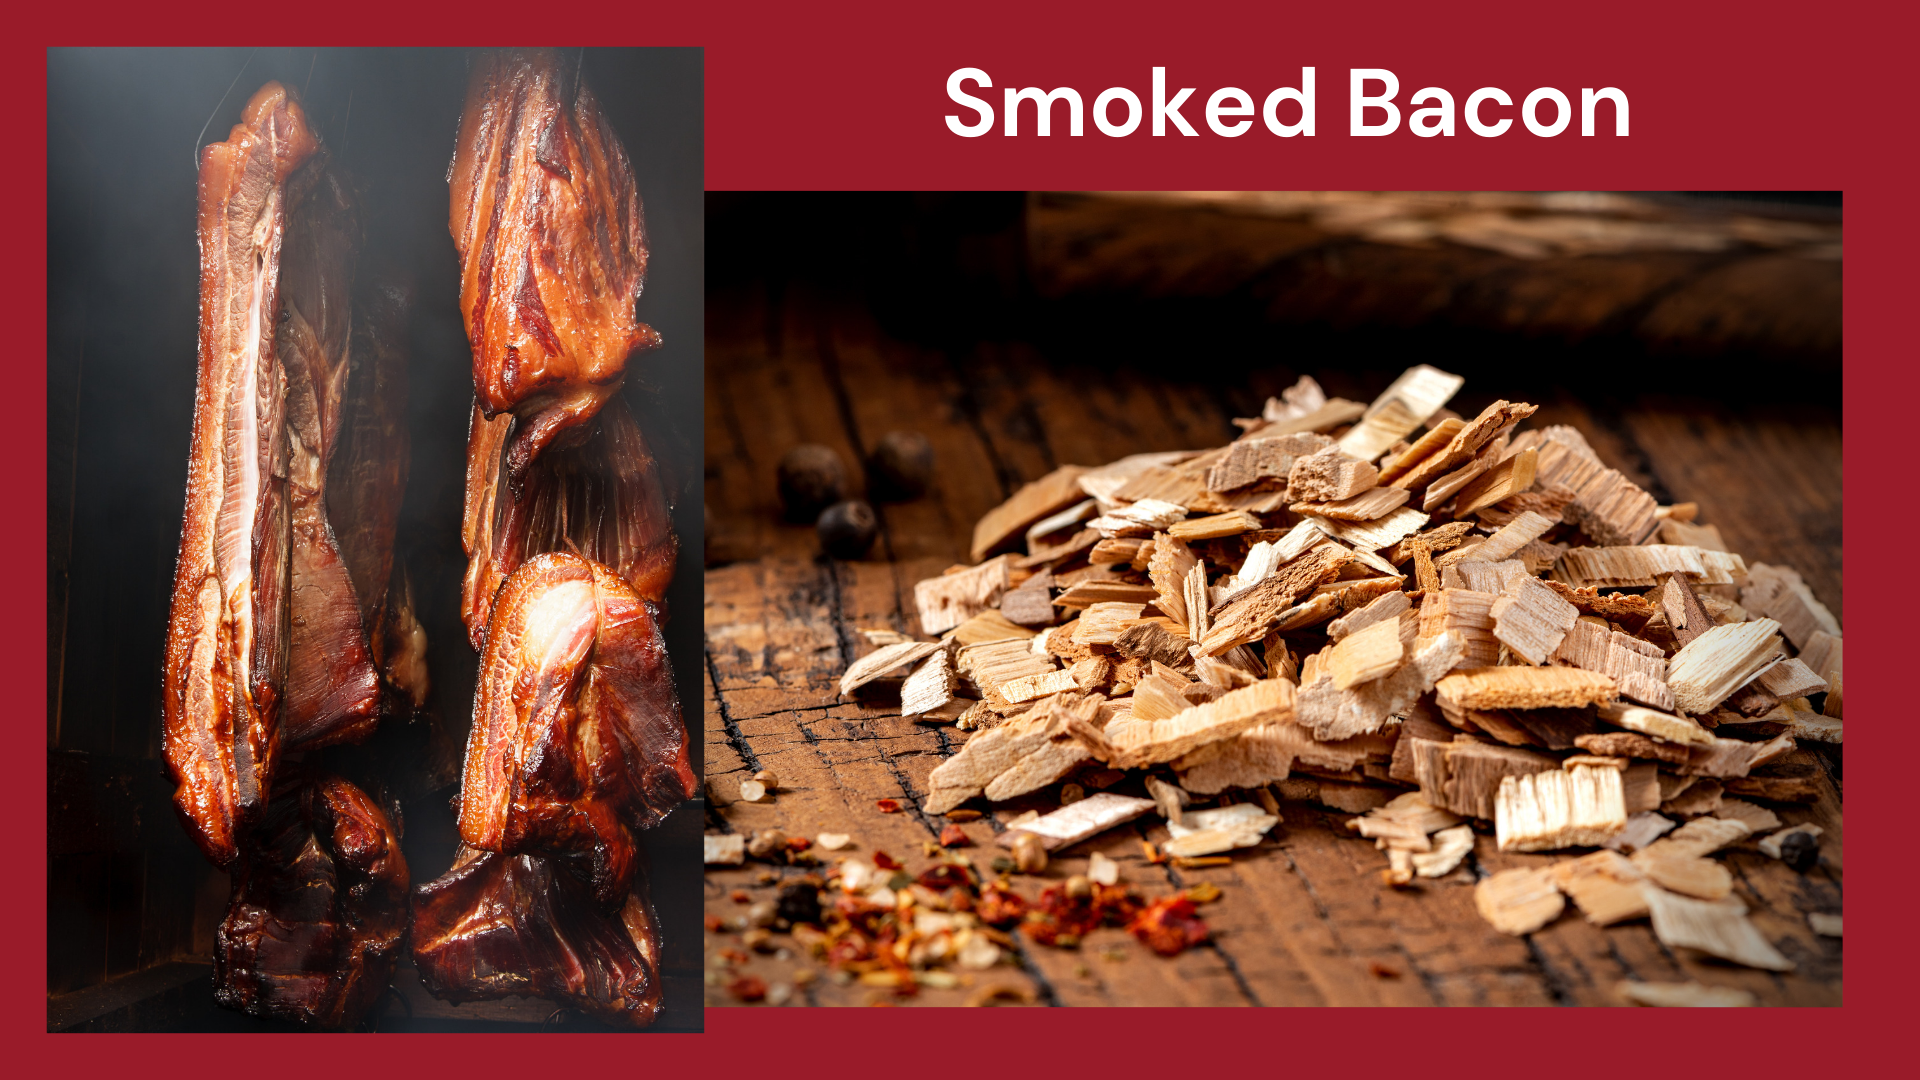 An image that shows smoked bacon and meat next to a picture of wood chips that are used for smoking meat. 